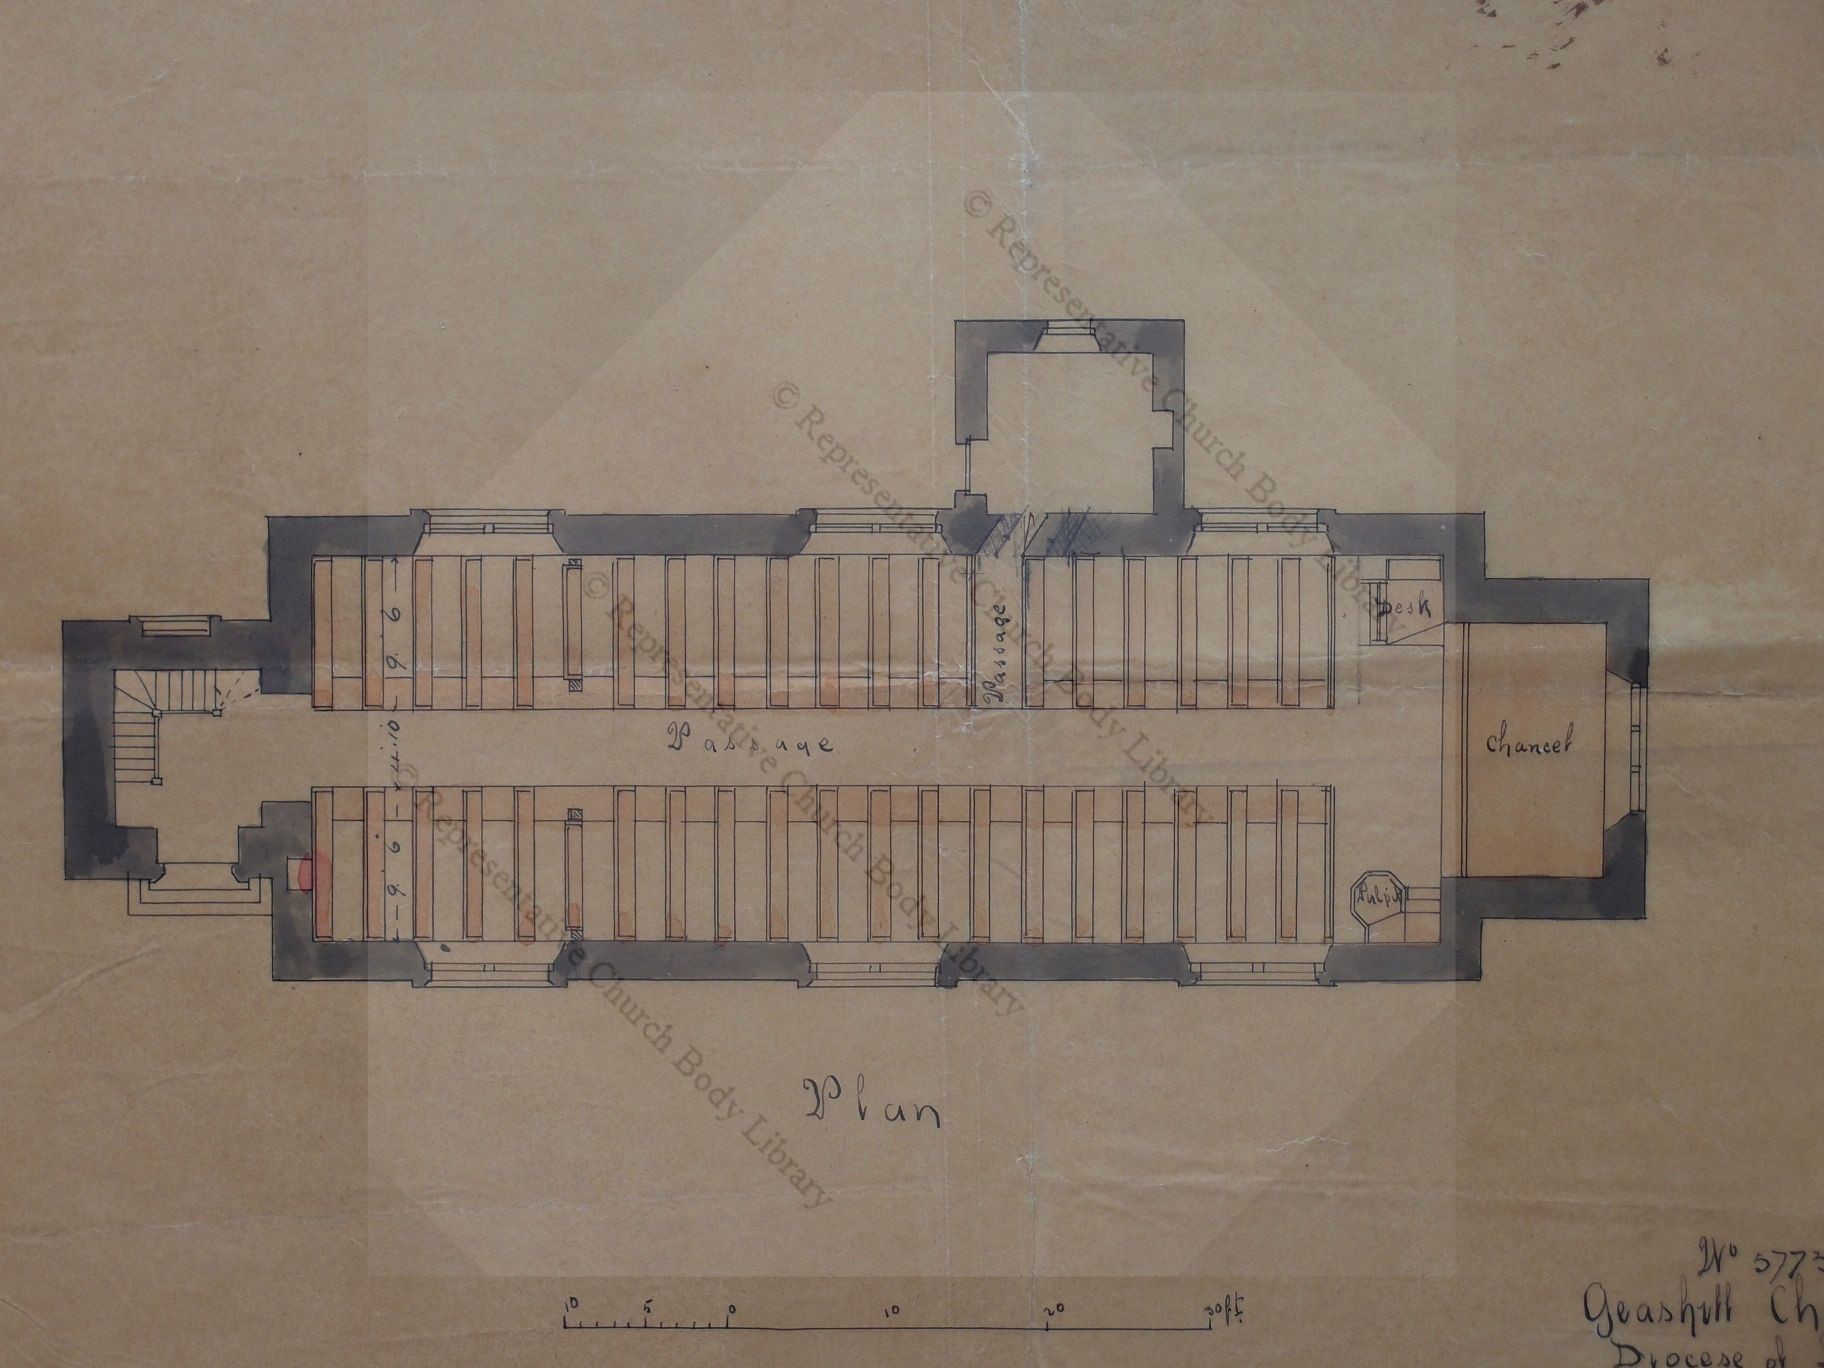 Plan of renovations to the church, 1868. Welland & Gillespie, “Geashill Church. Diocese of Kildare. No 5773. Plan. Welland & Gillespie. Articles of Agreement 22 August 1868,” RCB Library - Architectural 